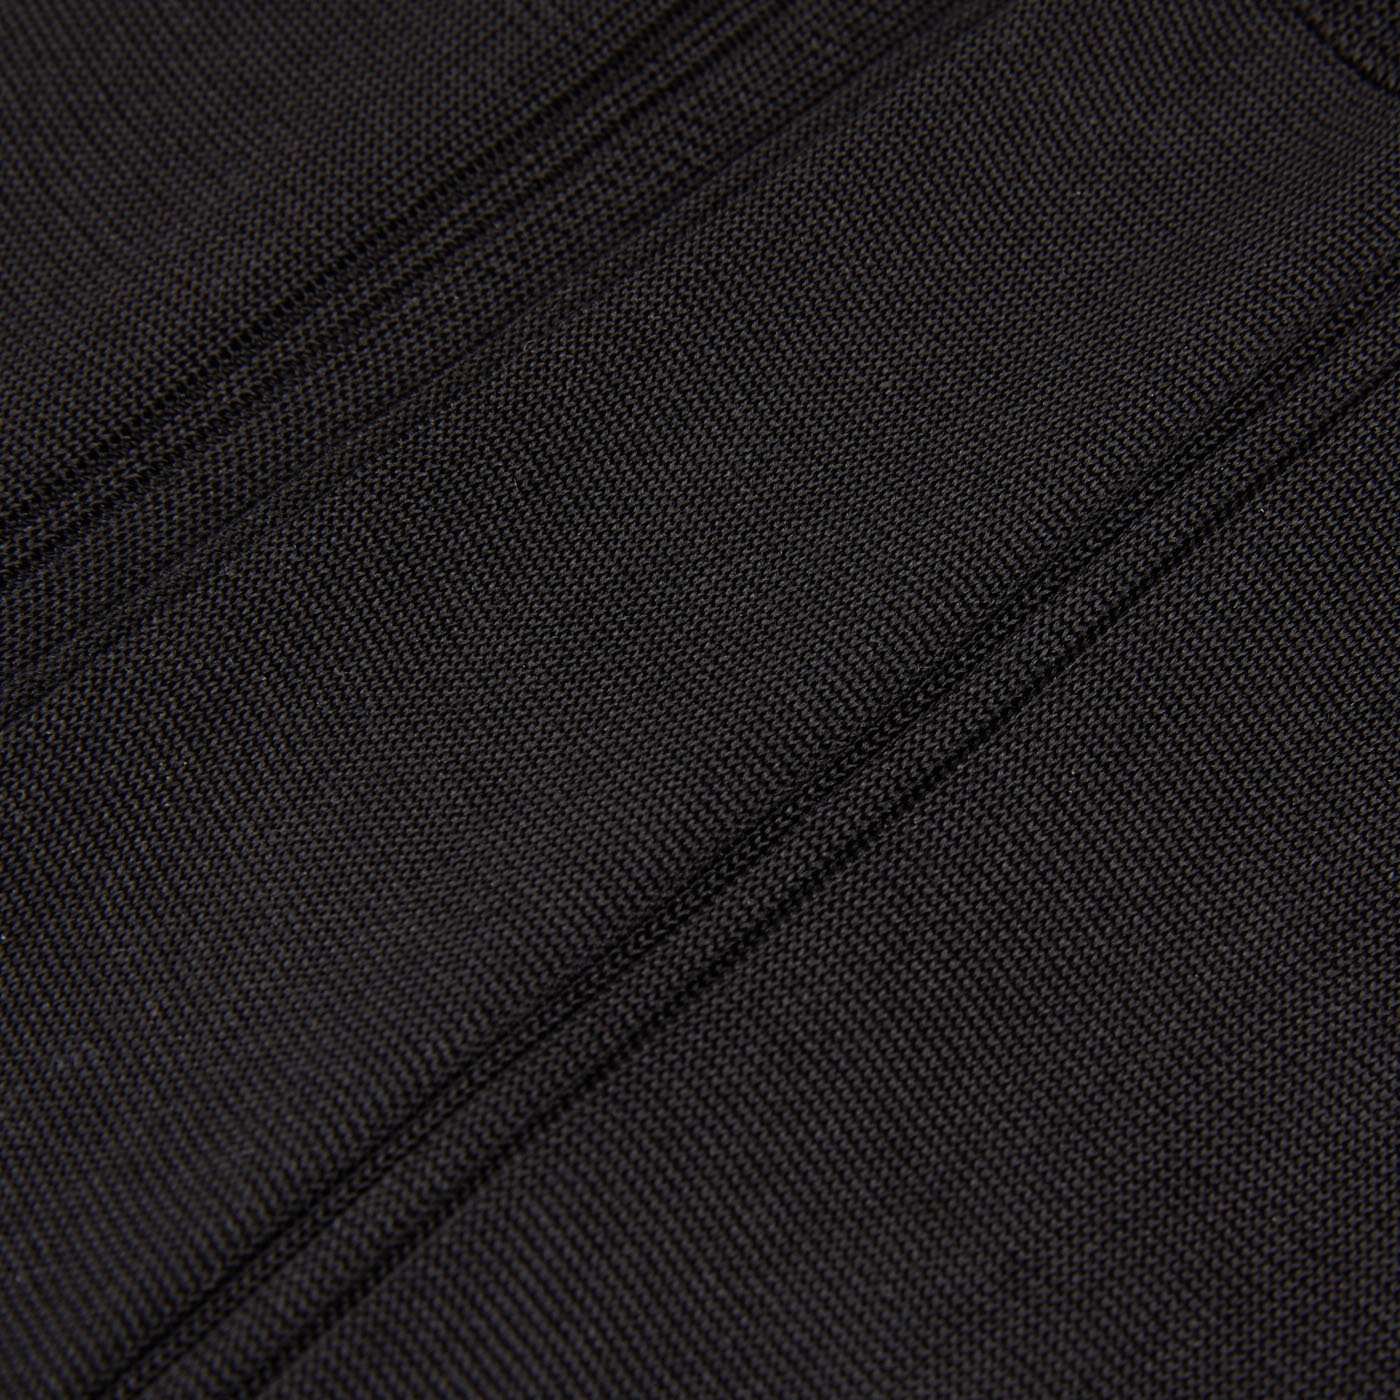 A close up image of a Canali black suitcase with pure silk lining.